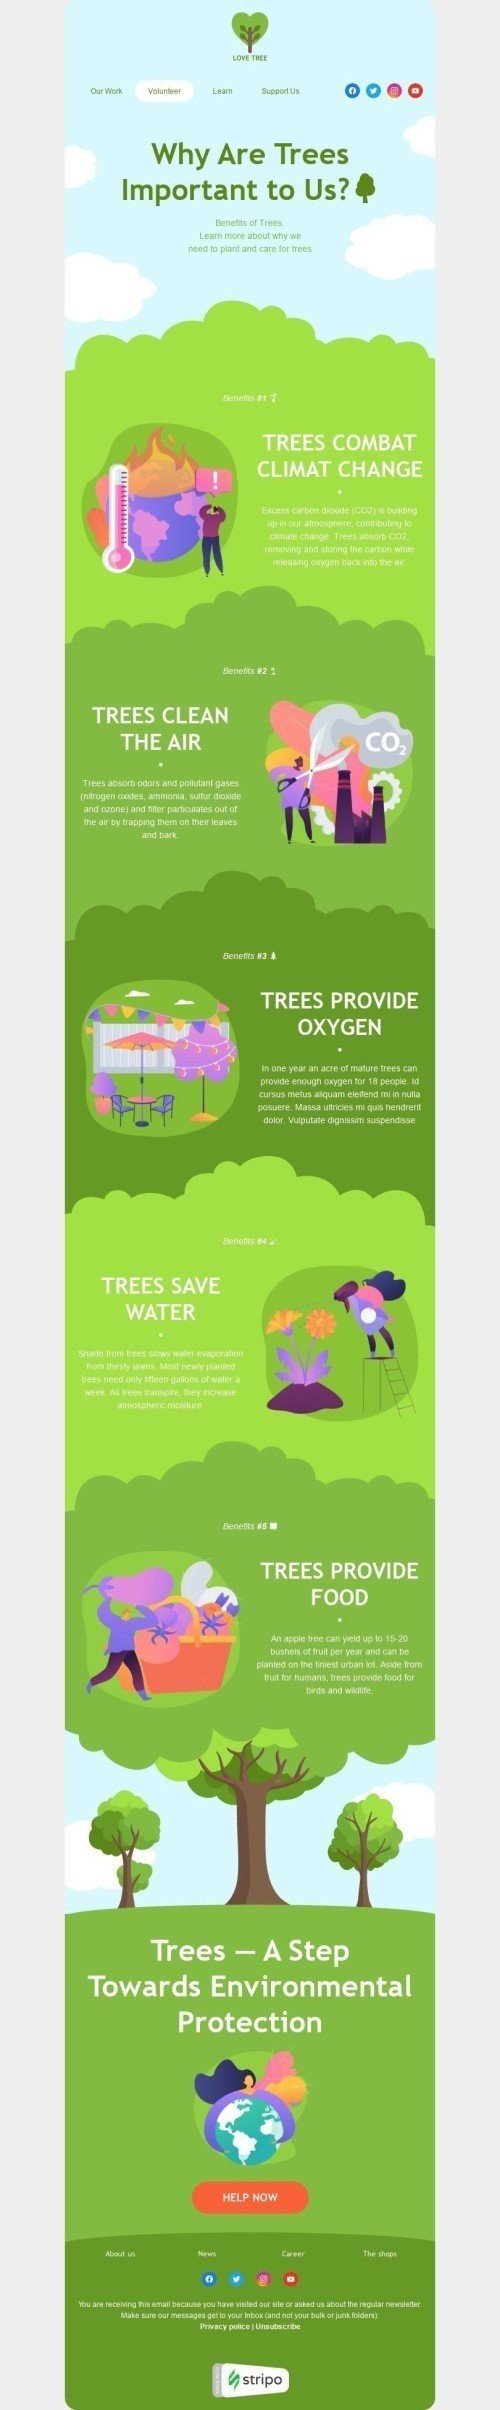 World Environment Day Email Template "Trees important to us" for Fundraising industry desktop view